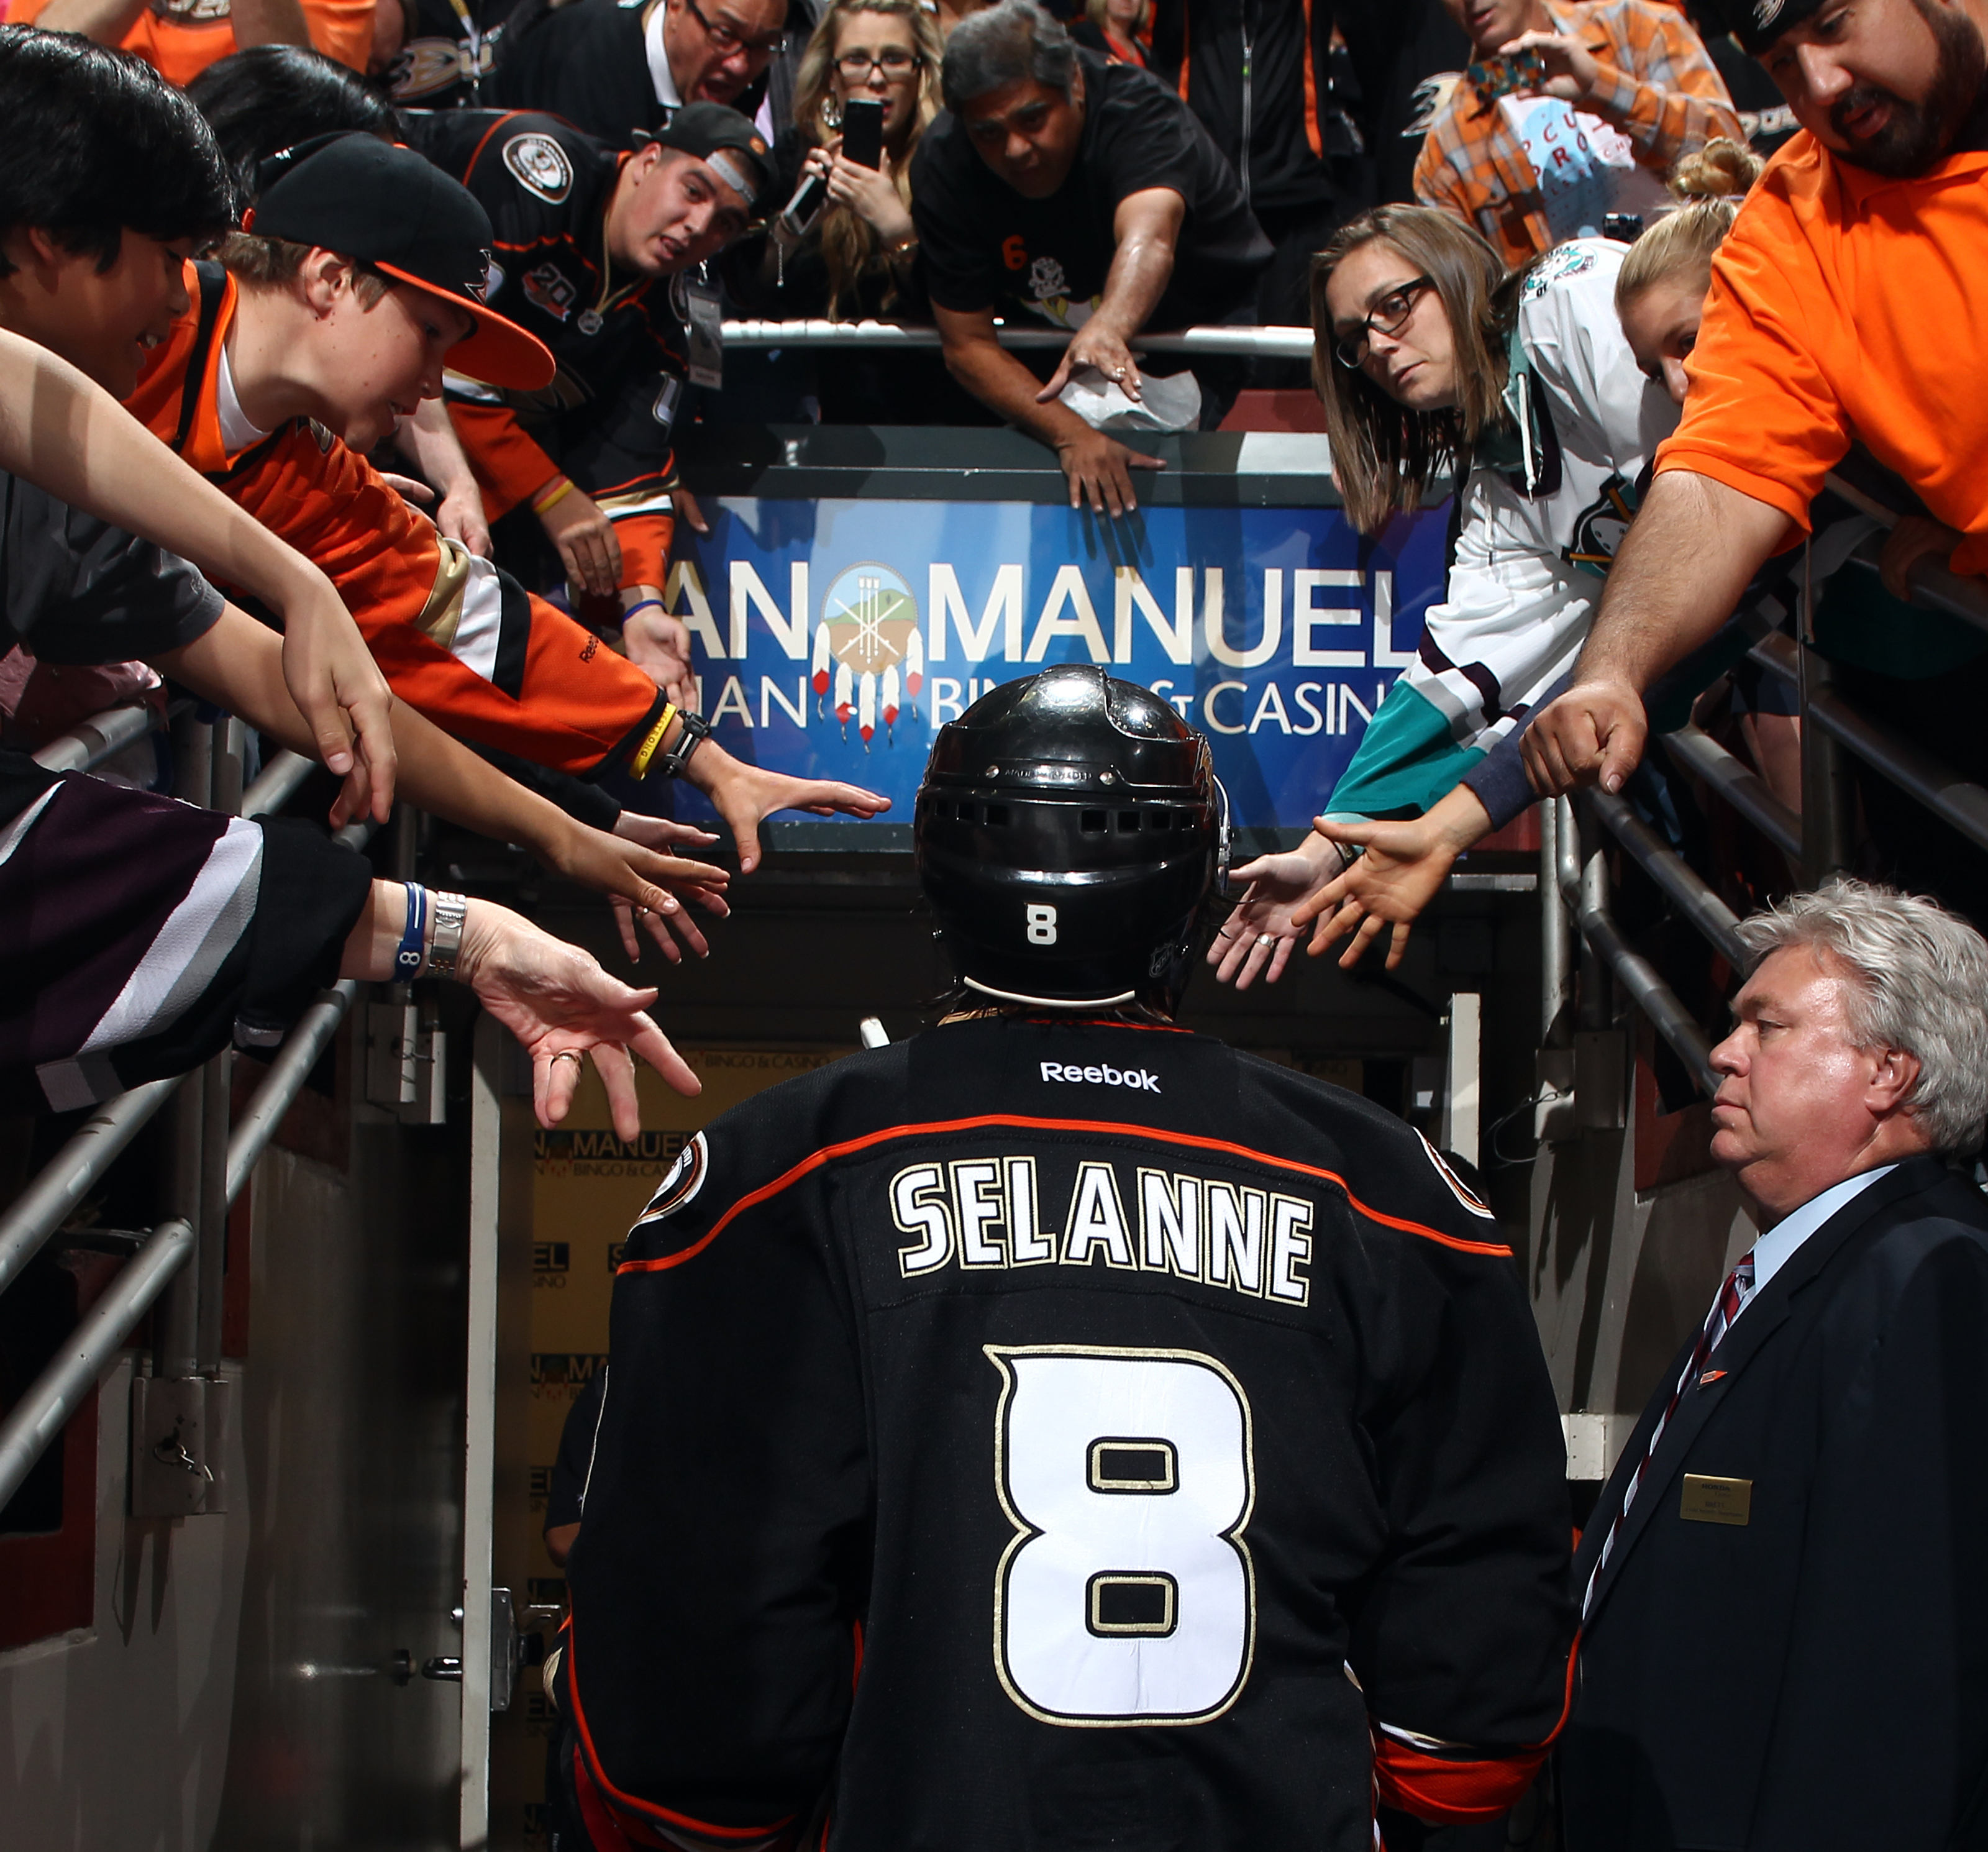 Ducks Notes: Dependable Andrew Cogliano off to fast start – San